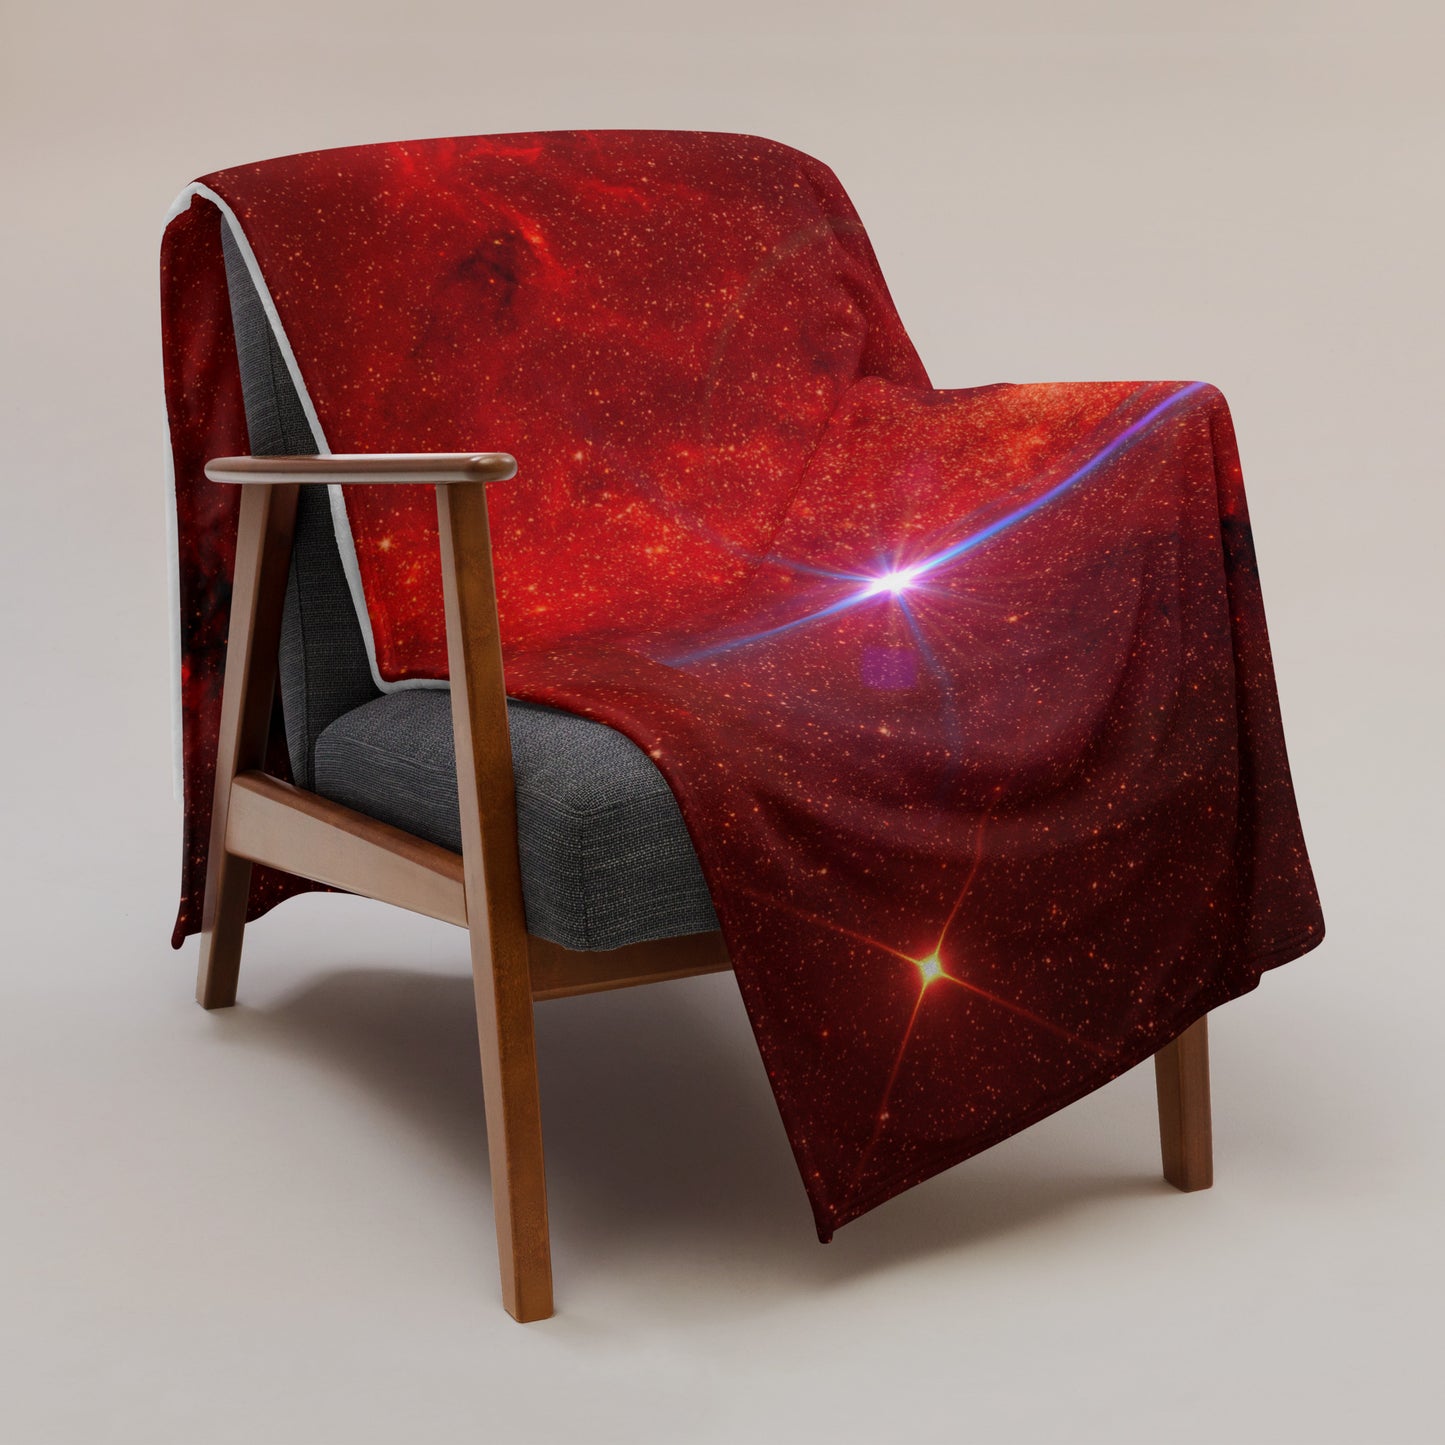 Red Space Throw Blanket